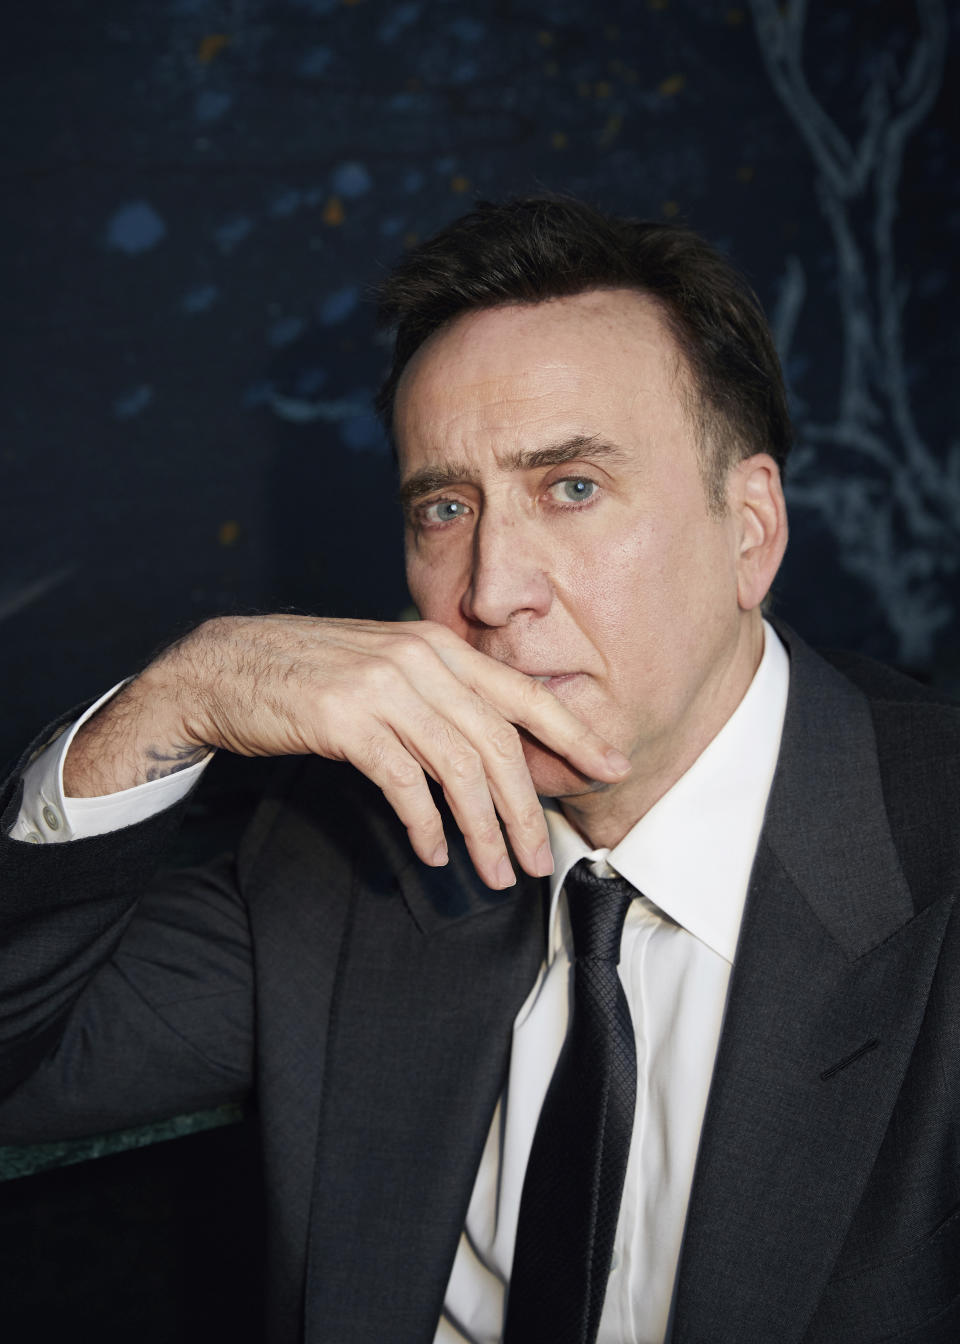 Nicolas Cage poses for a portrait to promote "The Unbearable Weight of Massive Talent" in New York on April 9, 2022. (Photo by Taylor Jewell/Invision/AP)